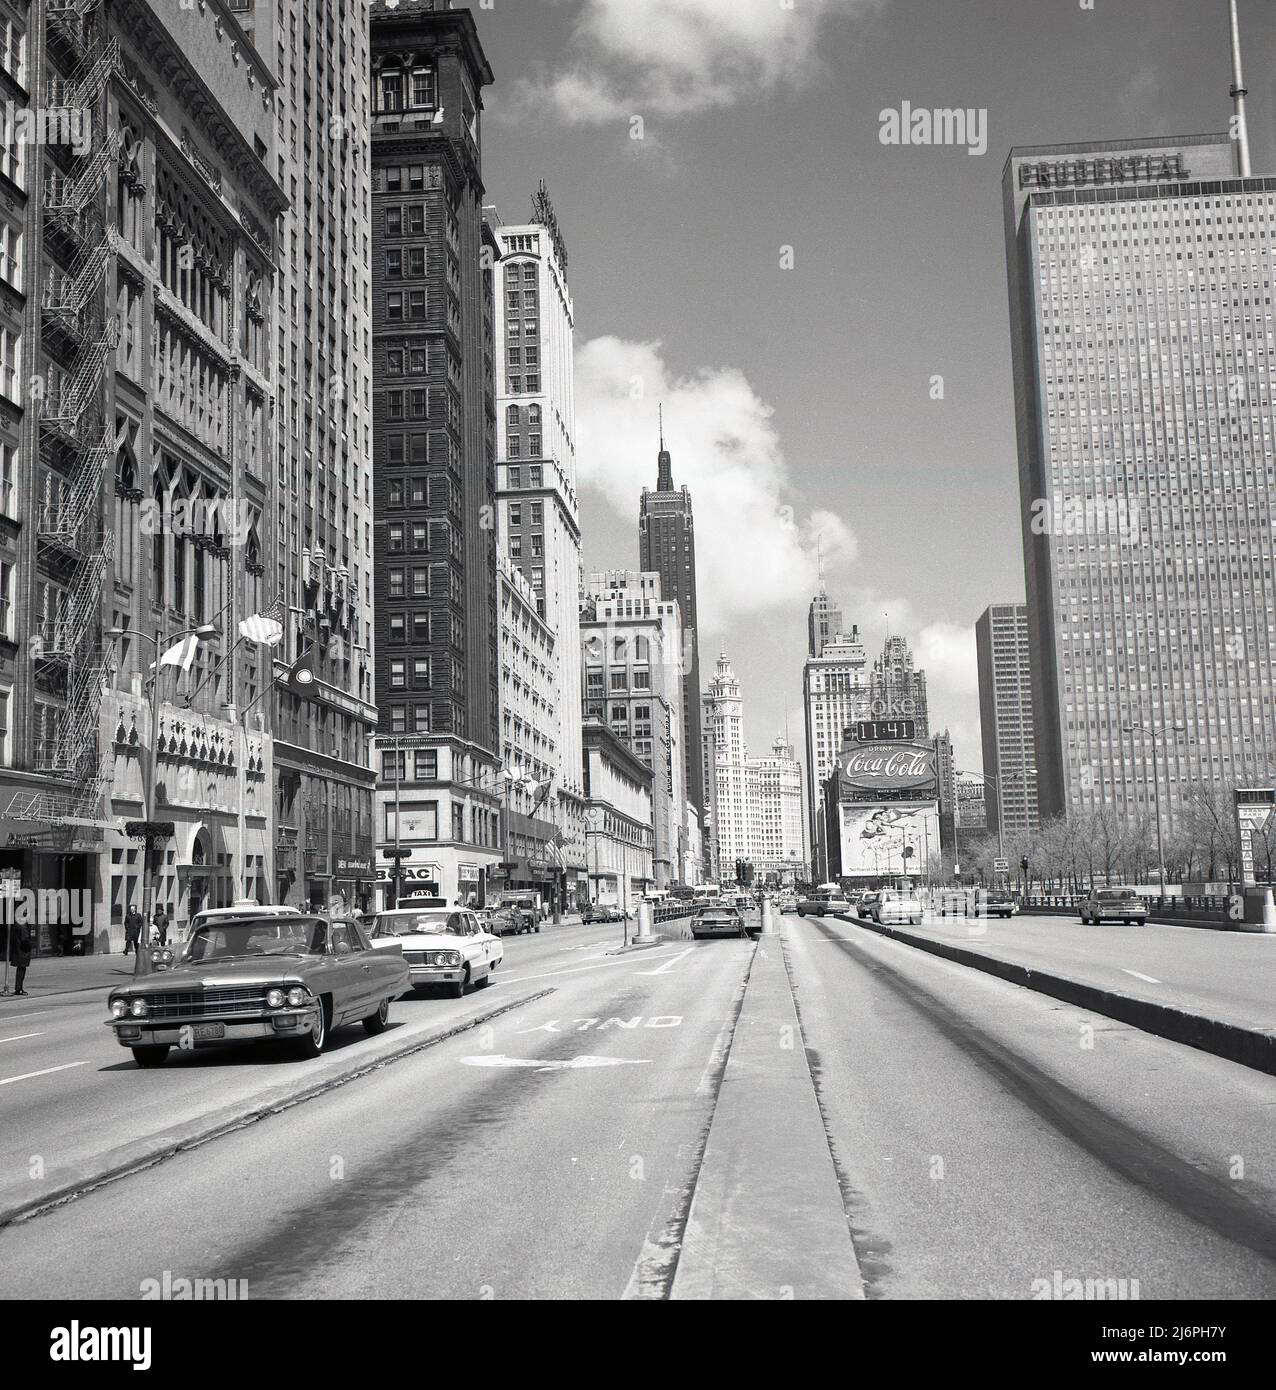 1950s, historical picture by J Allan Cash of N. Michigan Ave, Chicago, USA, showing the Maremont Bldg, Prudential Building and American automobiles of the era. The mid American headquarters of the US Insurance company Prudential was a 41-story building completed in 1955, and significant as the first skyscraper built in Chicago since the 1930s Great Depression and the Second World War. On the far right, the entrance to the underground parking at Grant Park. Opened in 1954, the Grant Park (North) Garage, was a giant municipal parking space with three levels and 1,850 spaces. Stock Photo